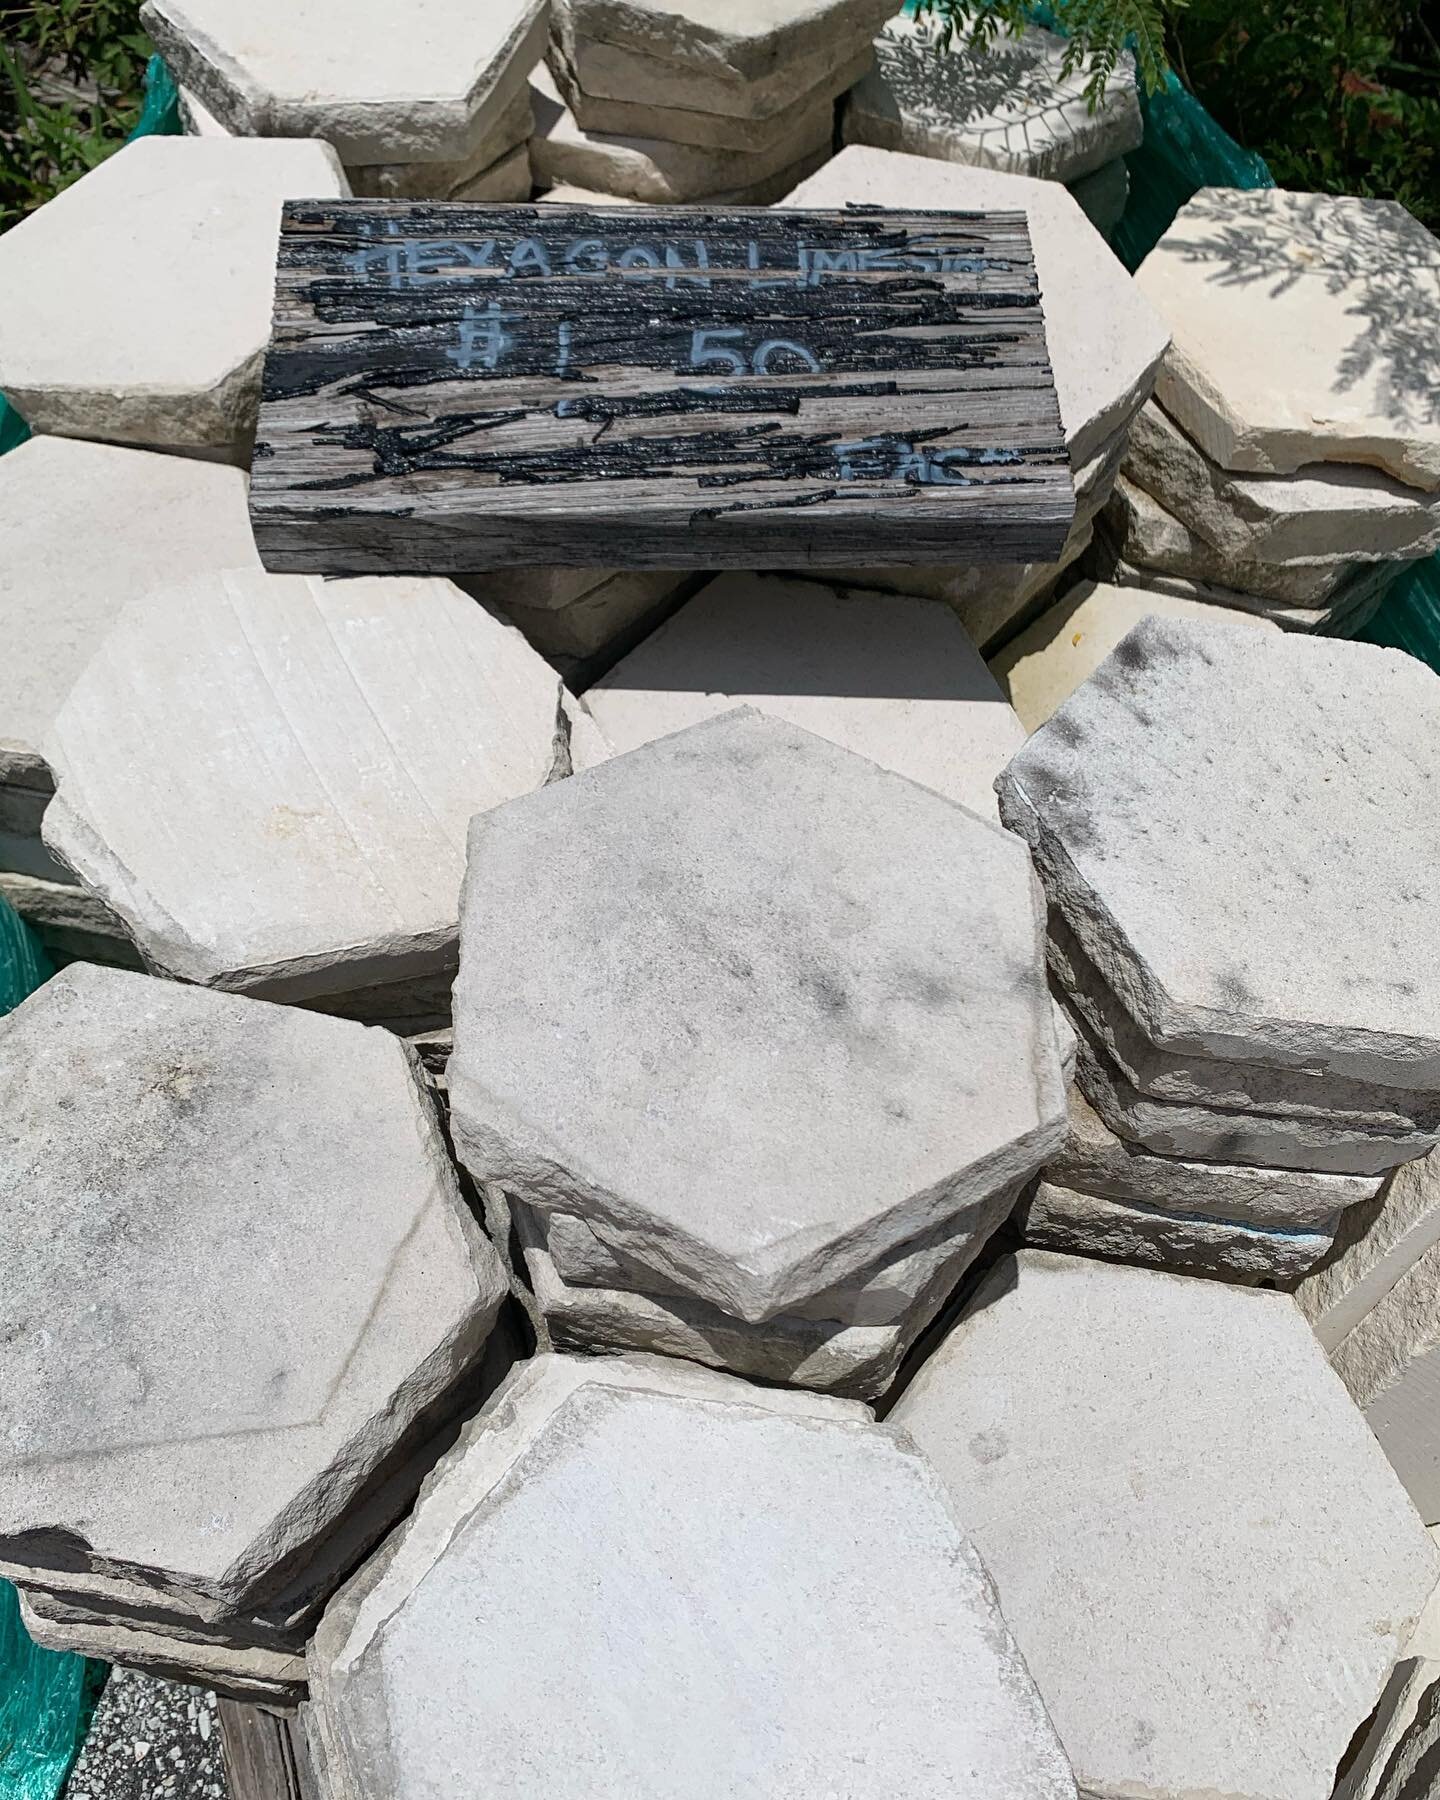 Give me all the stone and planters.  #salvage #antiques #outdoordesign #gardendesign #shoptampa #pavers #limestoneflooring